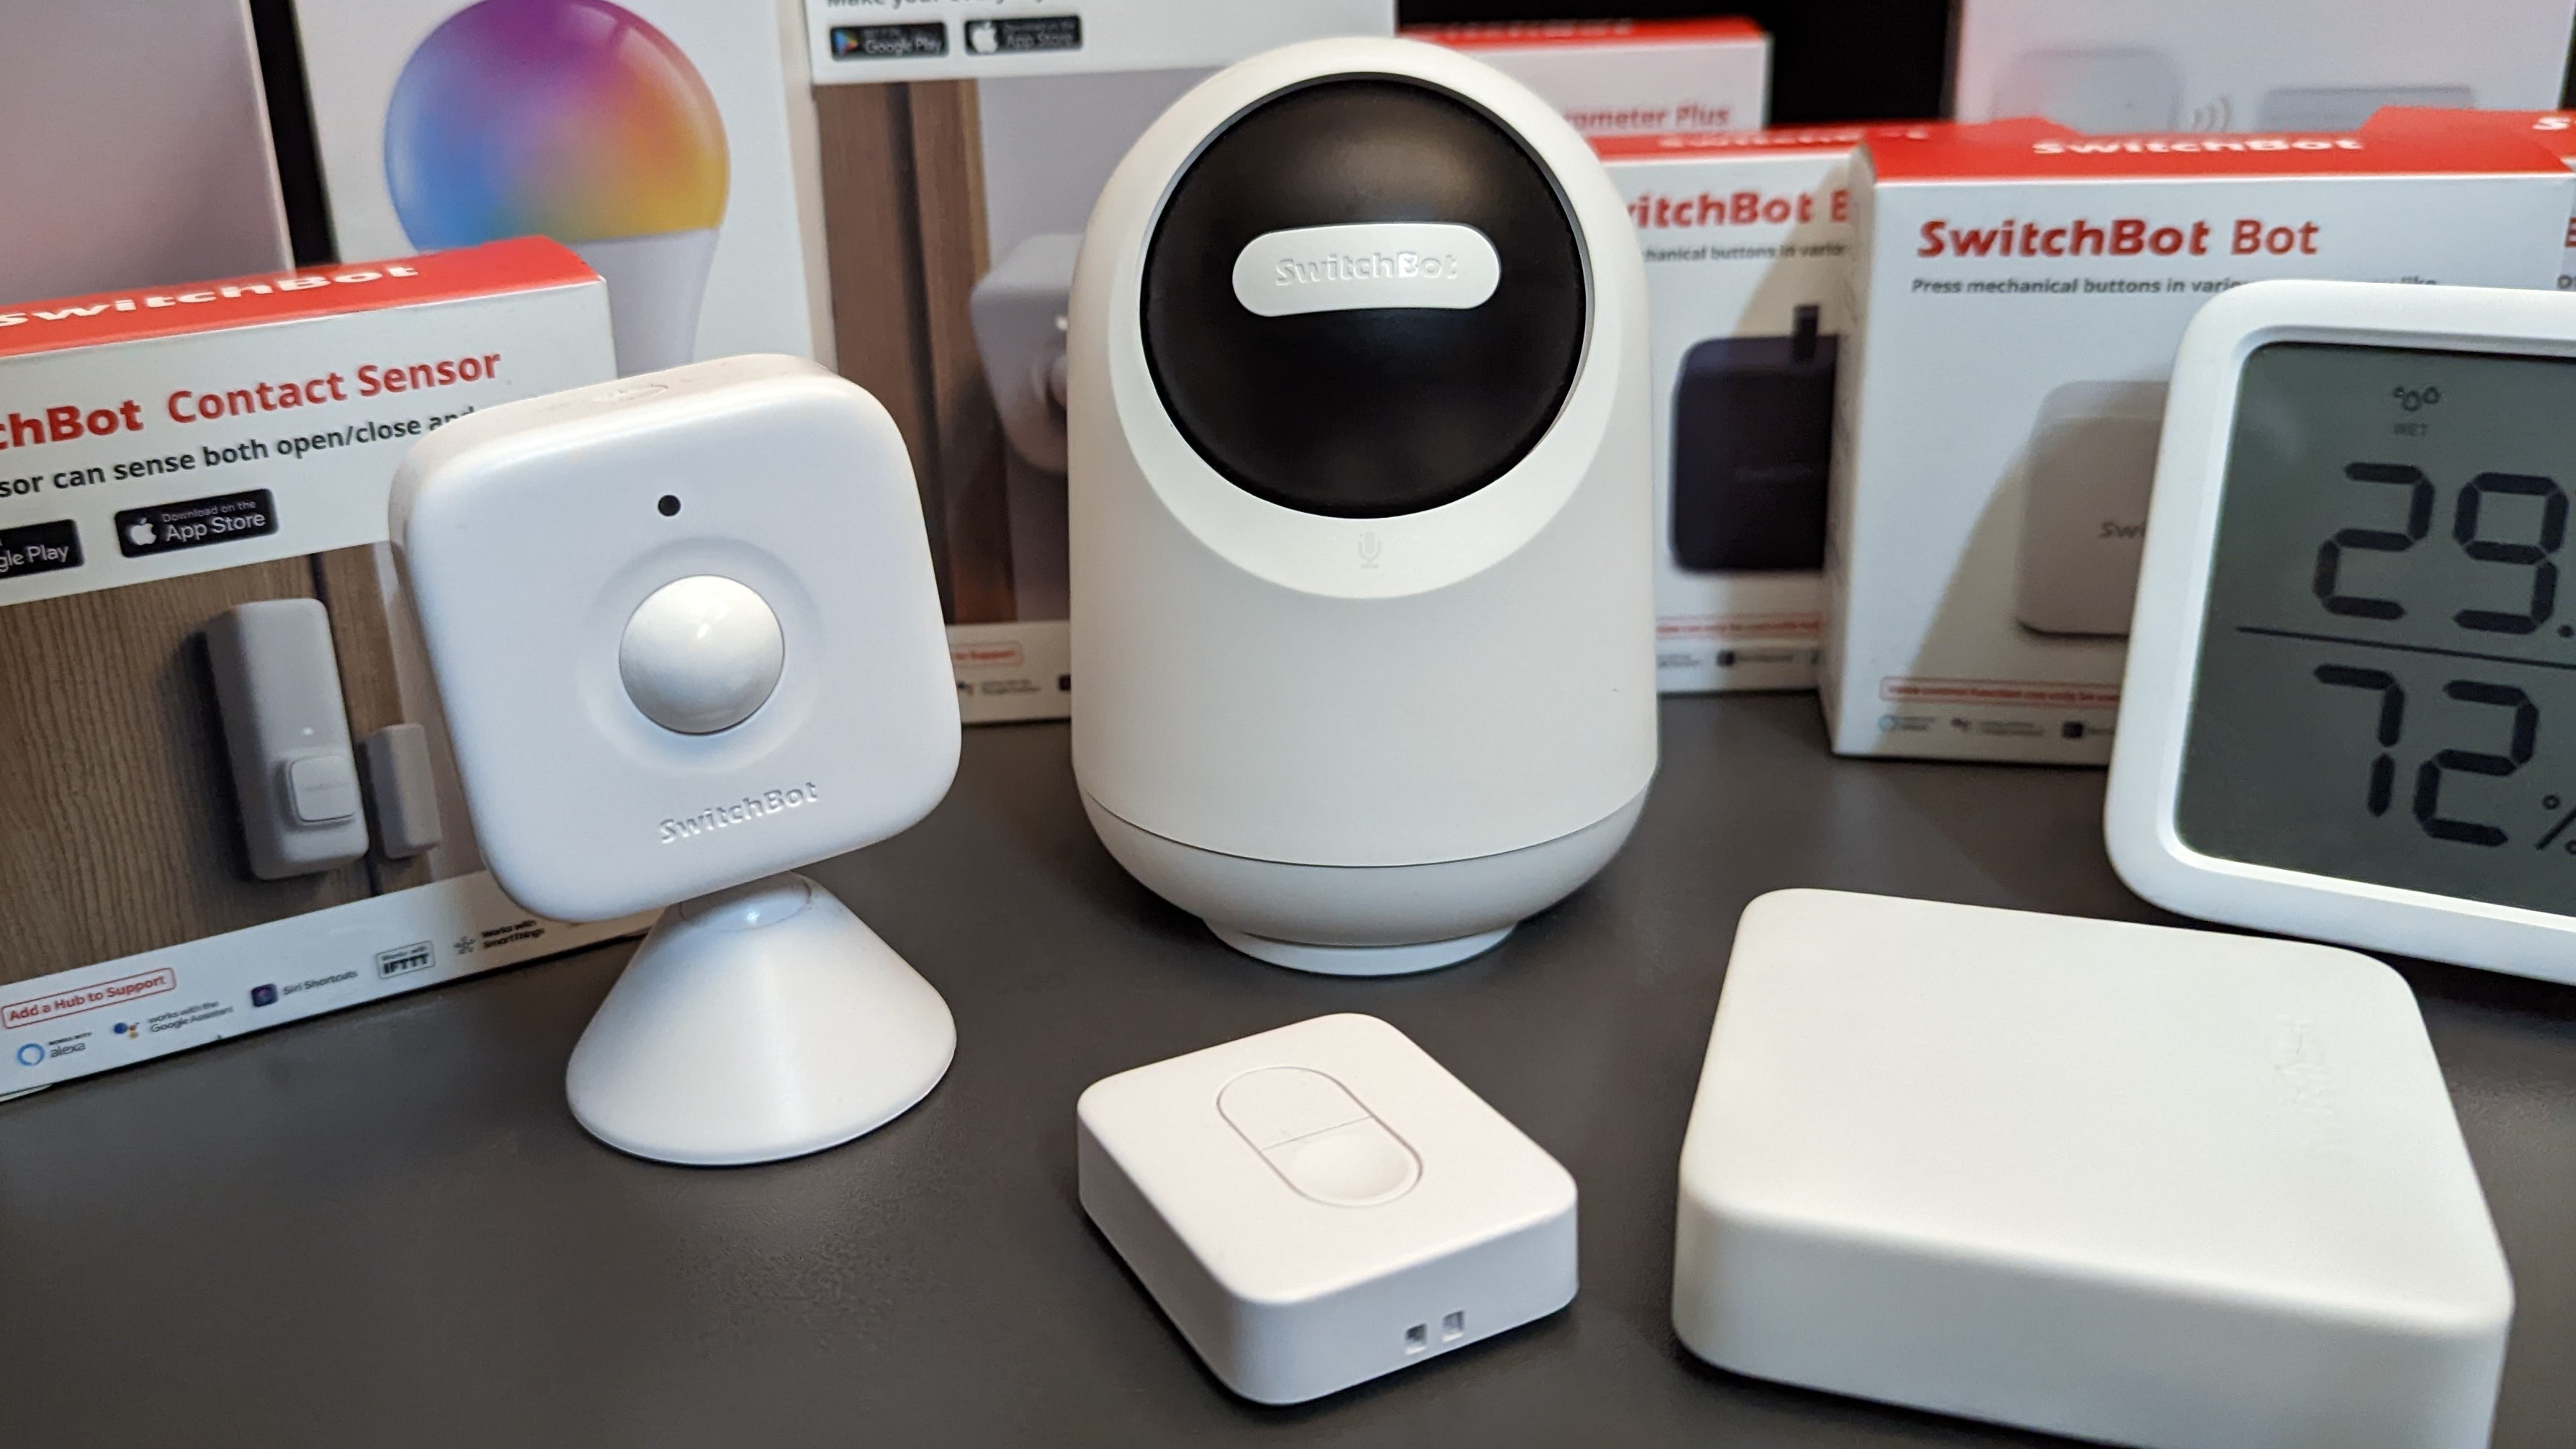 SwitchBot Bot review: Turn any dumb switches into a smart switch